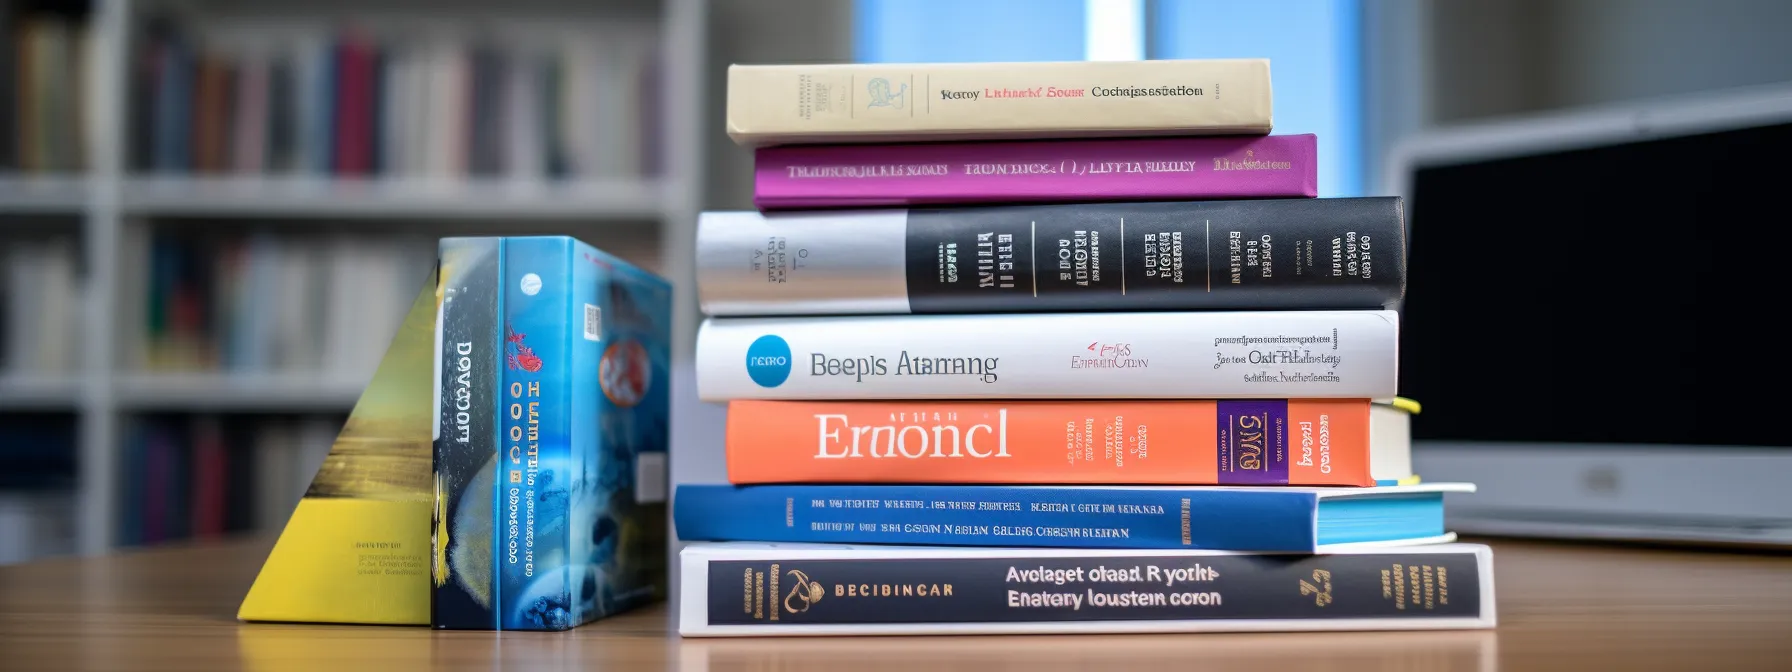 a stack of seo books with various titles and colorful covers sits on a desk, representing a comprehensive library of knowledge on search engine optimization.